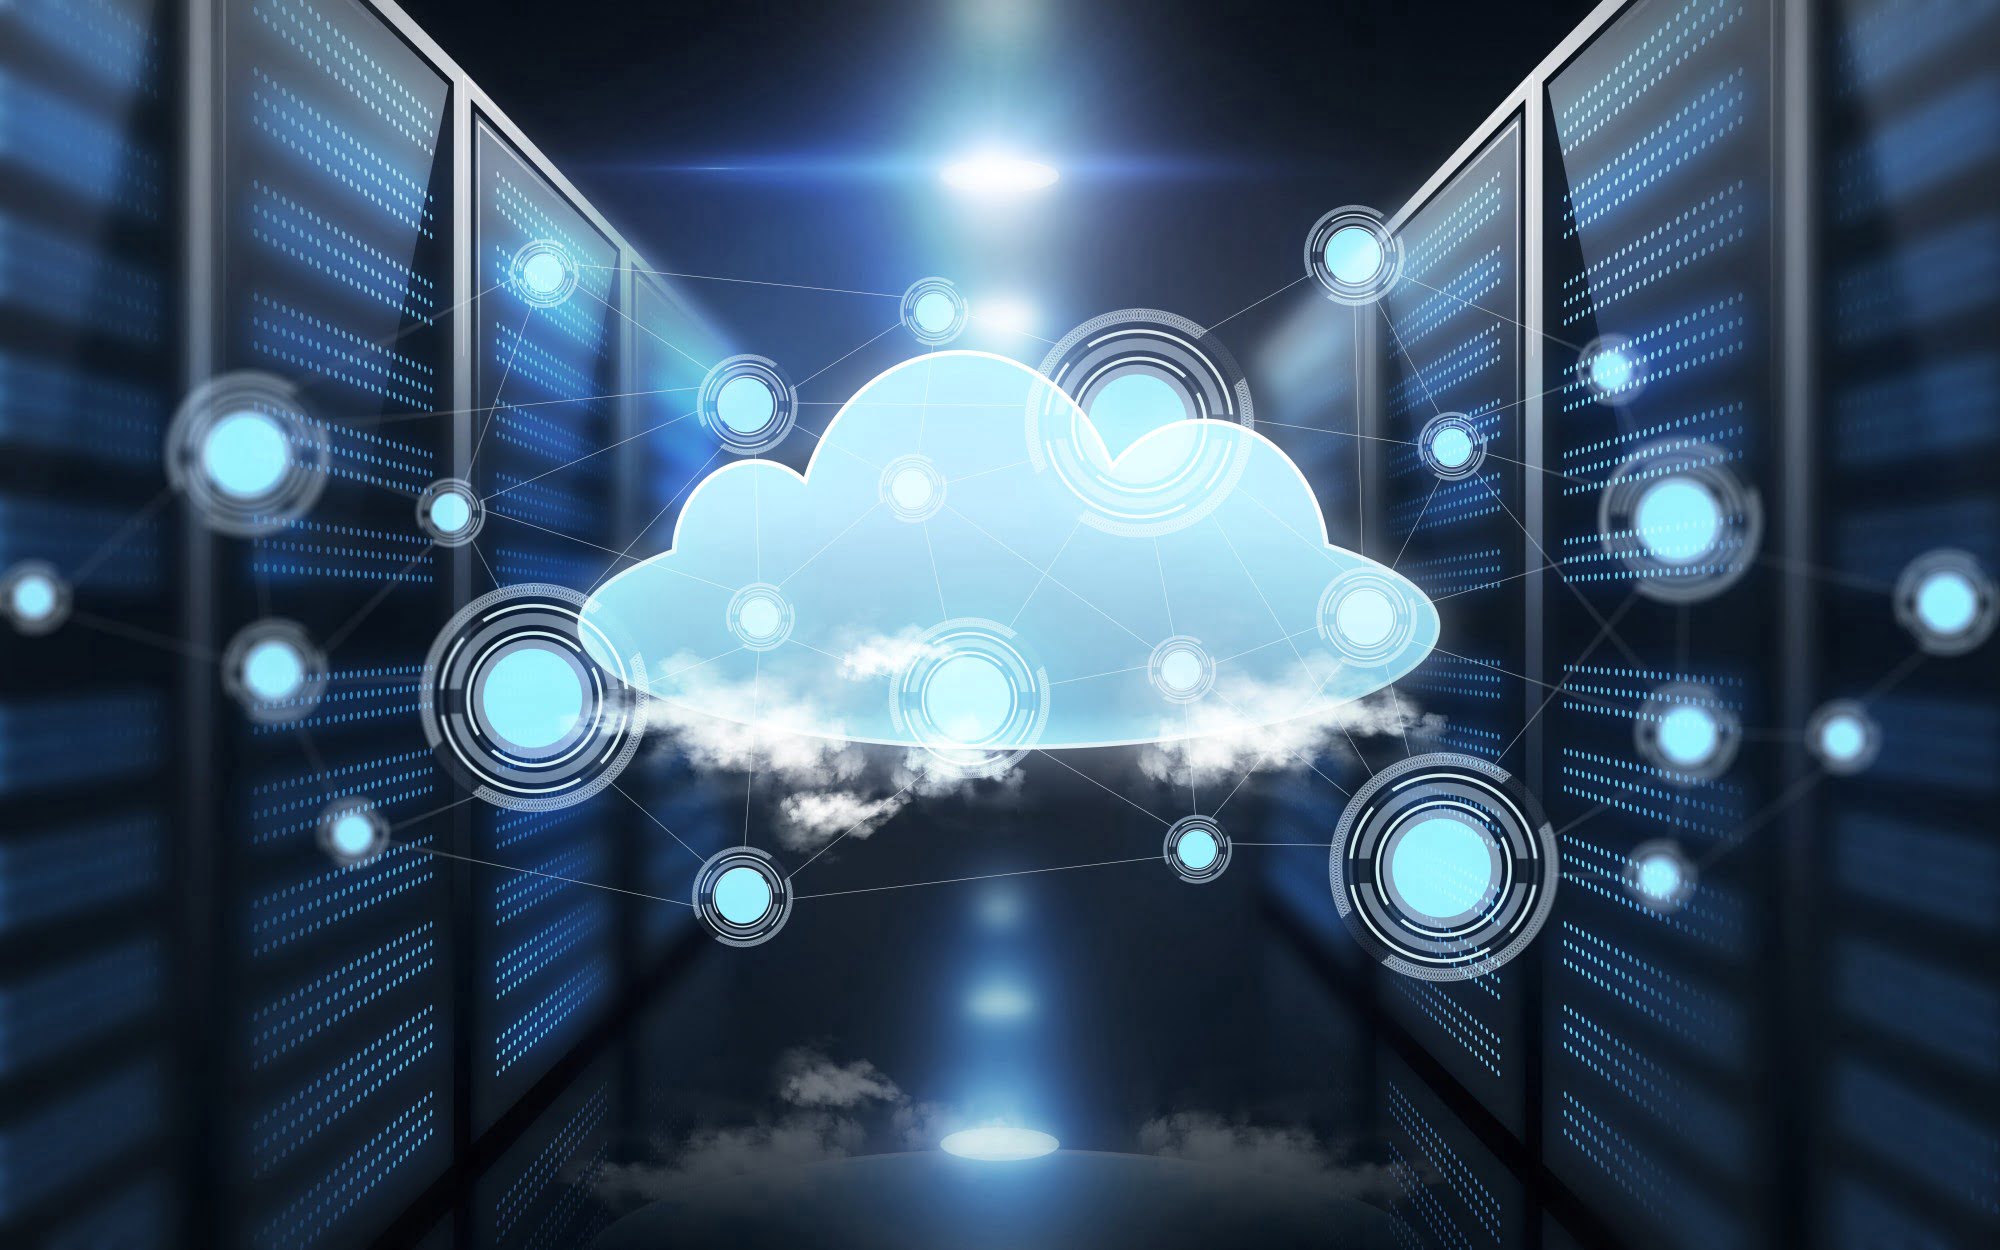 The Top 3 Benefits of Cloud Hosting (and Why They Matter)